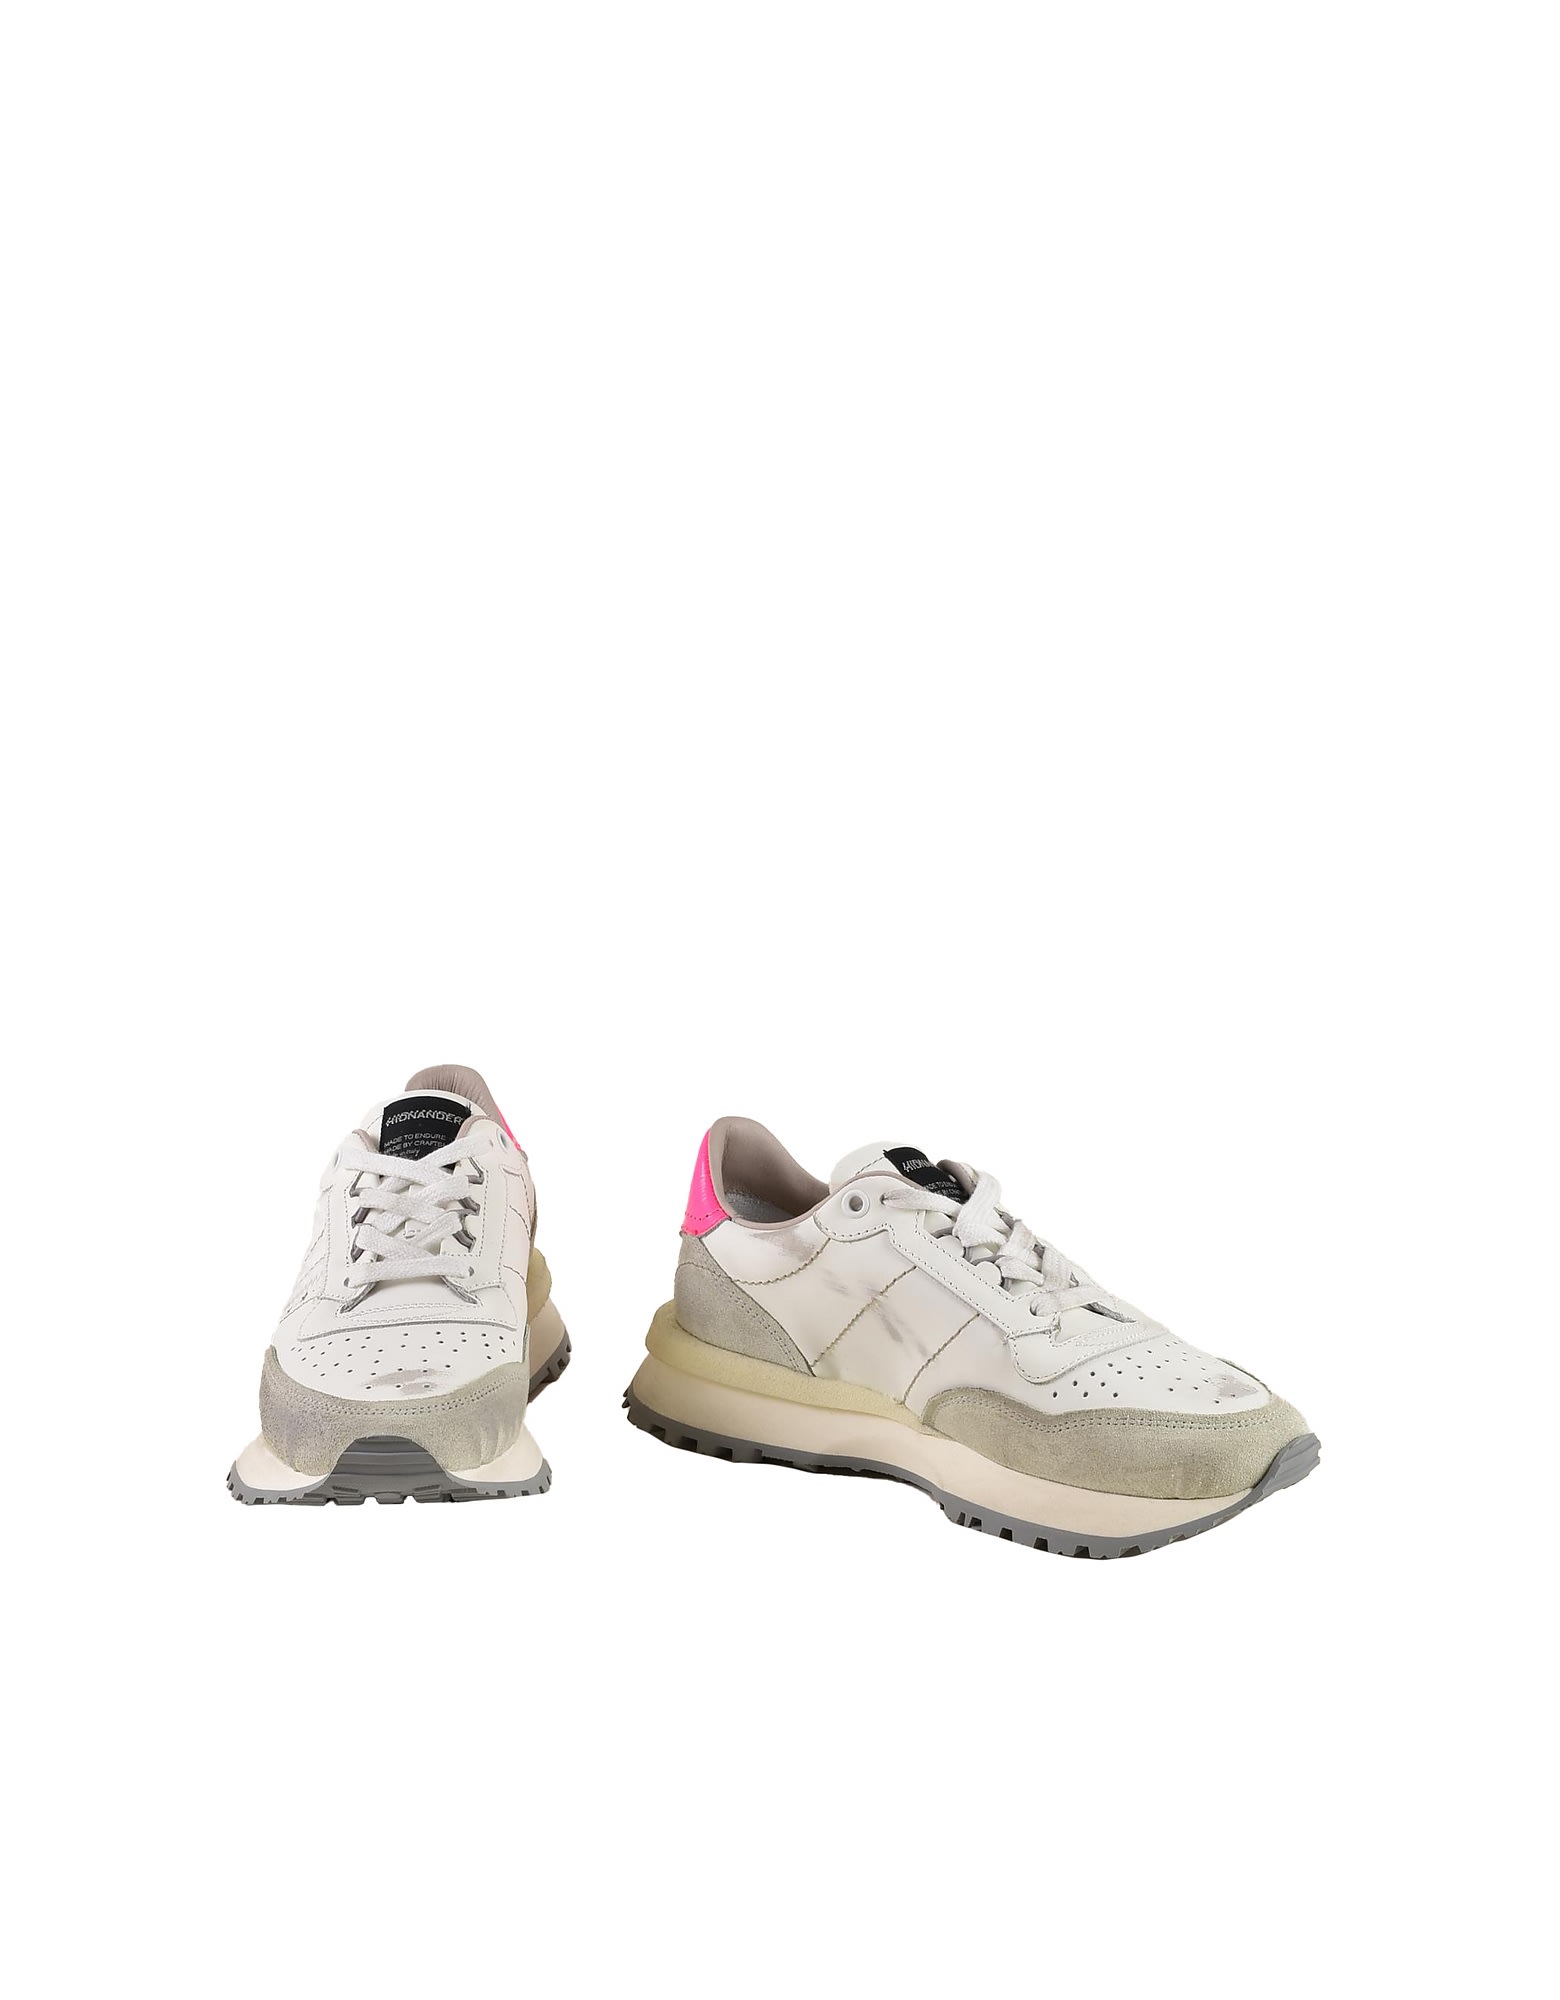 Hidnander Womens White / Gray Sneakers